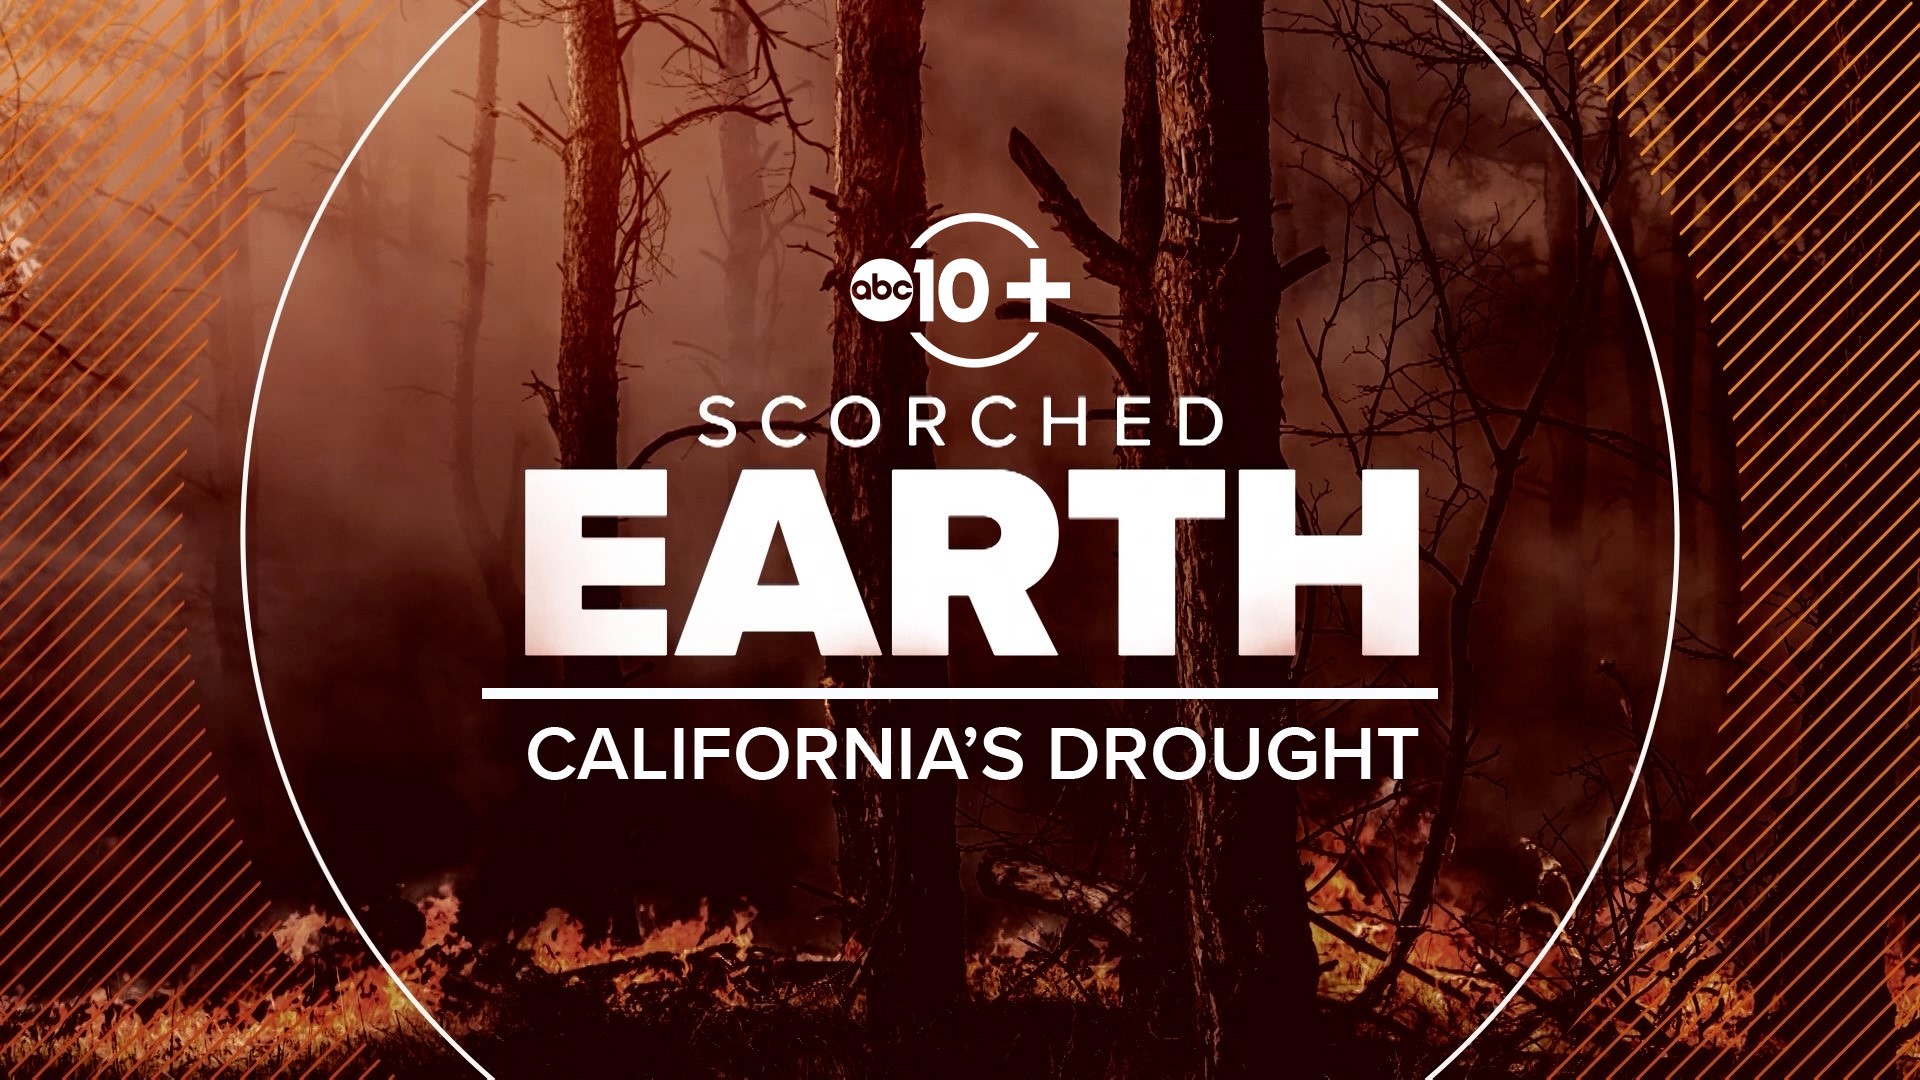 A look at how California's ongoing drought is shaping the lives of those who live and work in the Golden State. (Part 1 of 2)